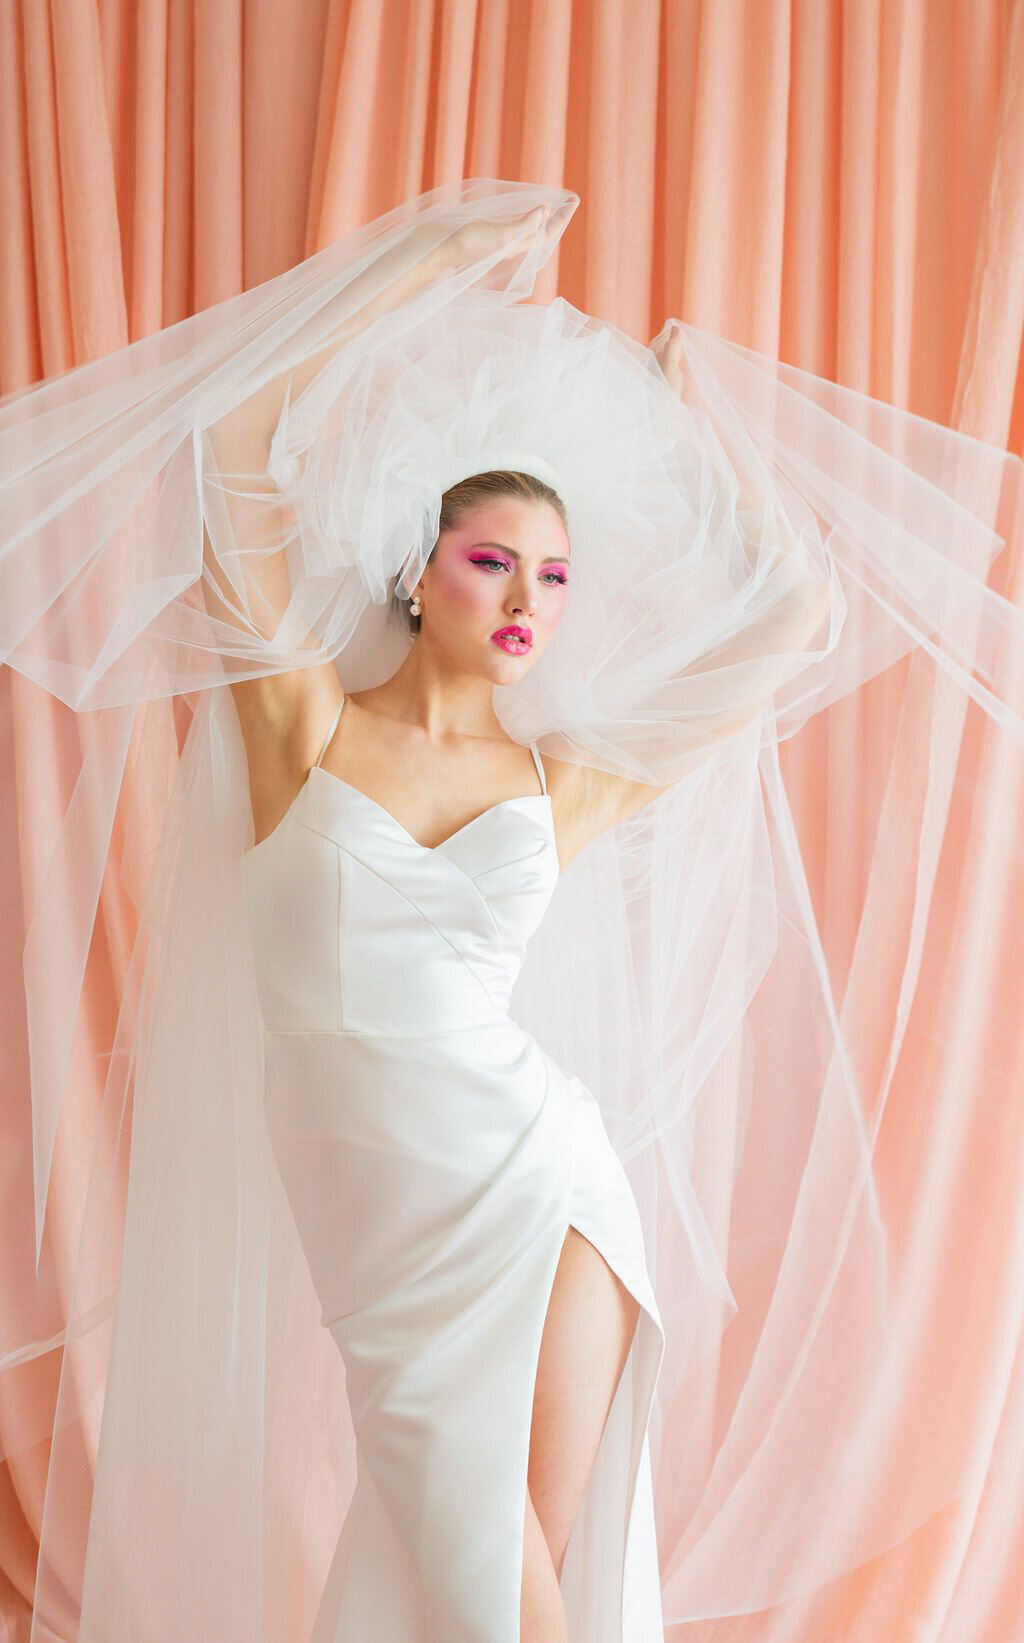 Fun veil for the modern bride by Blair Nadeau Bridal Adornments, romantic and modern wedding jewelry based in Brampton.  Featured on the Brontë Bride Vendor Guide.